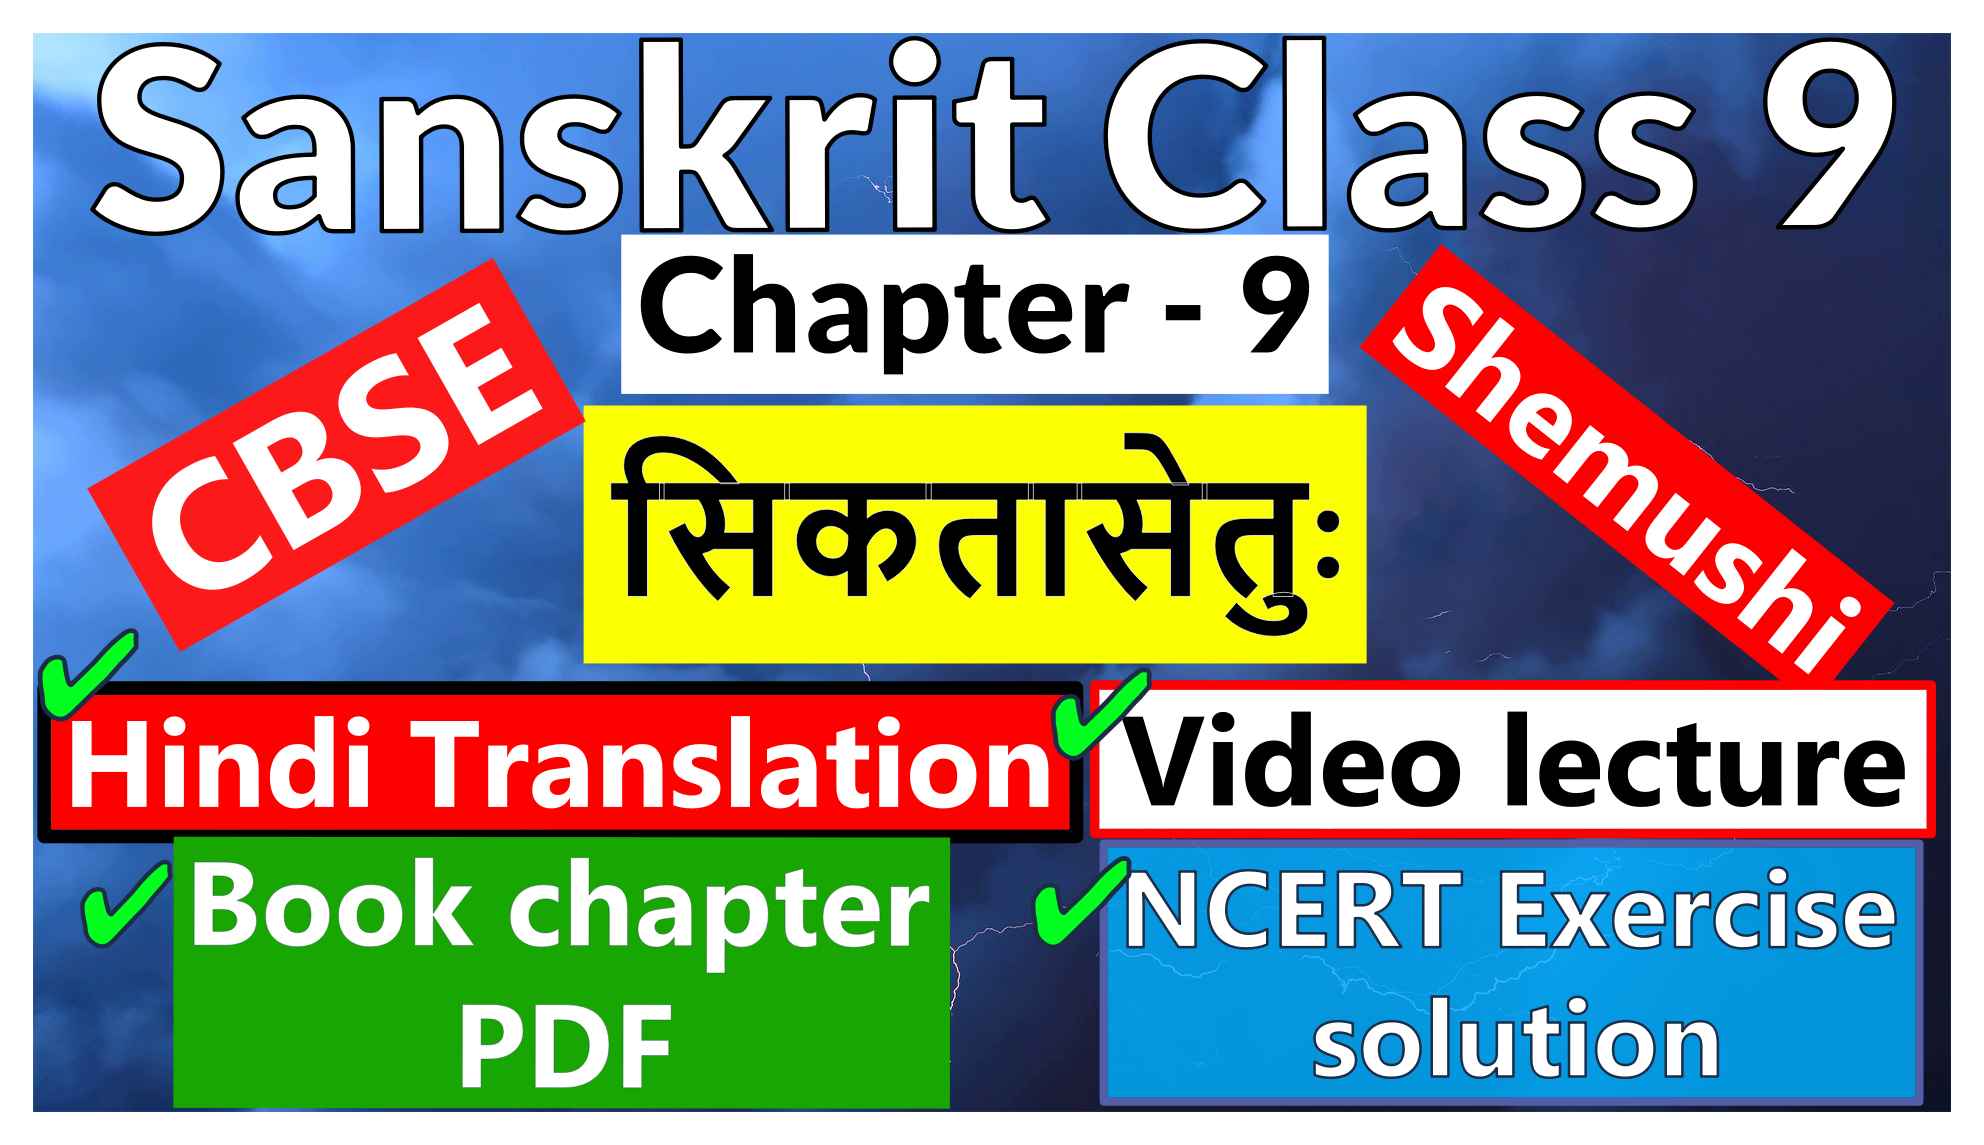 Sanskrit Class 9-Chapter 9 - सिकतासेतुः - Hindi Translation, Video lecture, NCERT Exercise solution (Question-Answer), Book chapter PDF.jpg